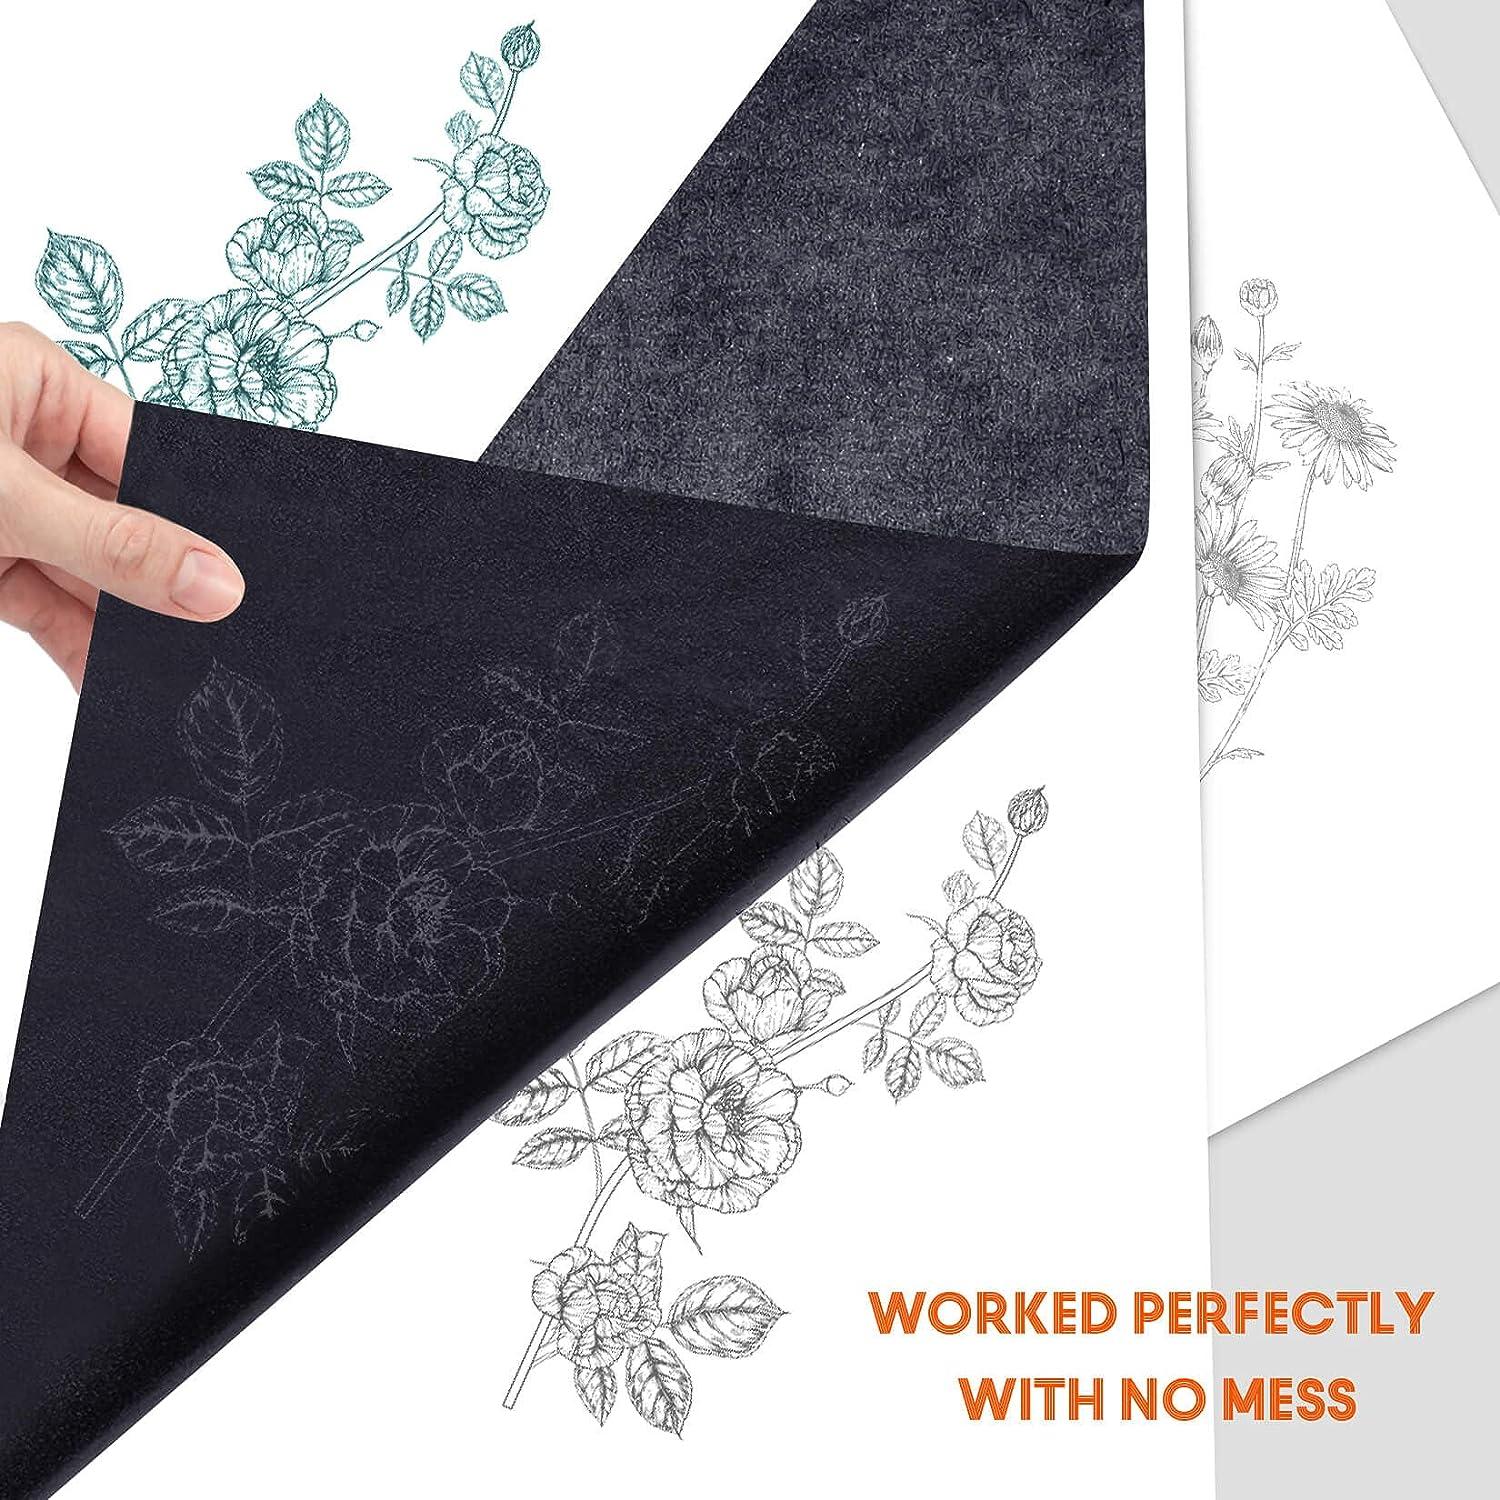 How To Use Graphite Transfer Paper 